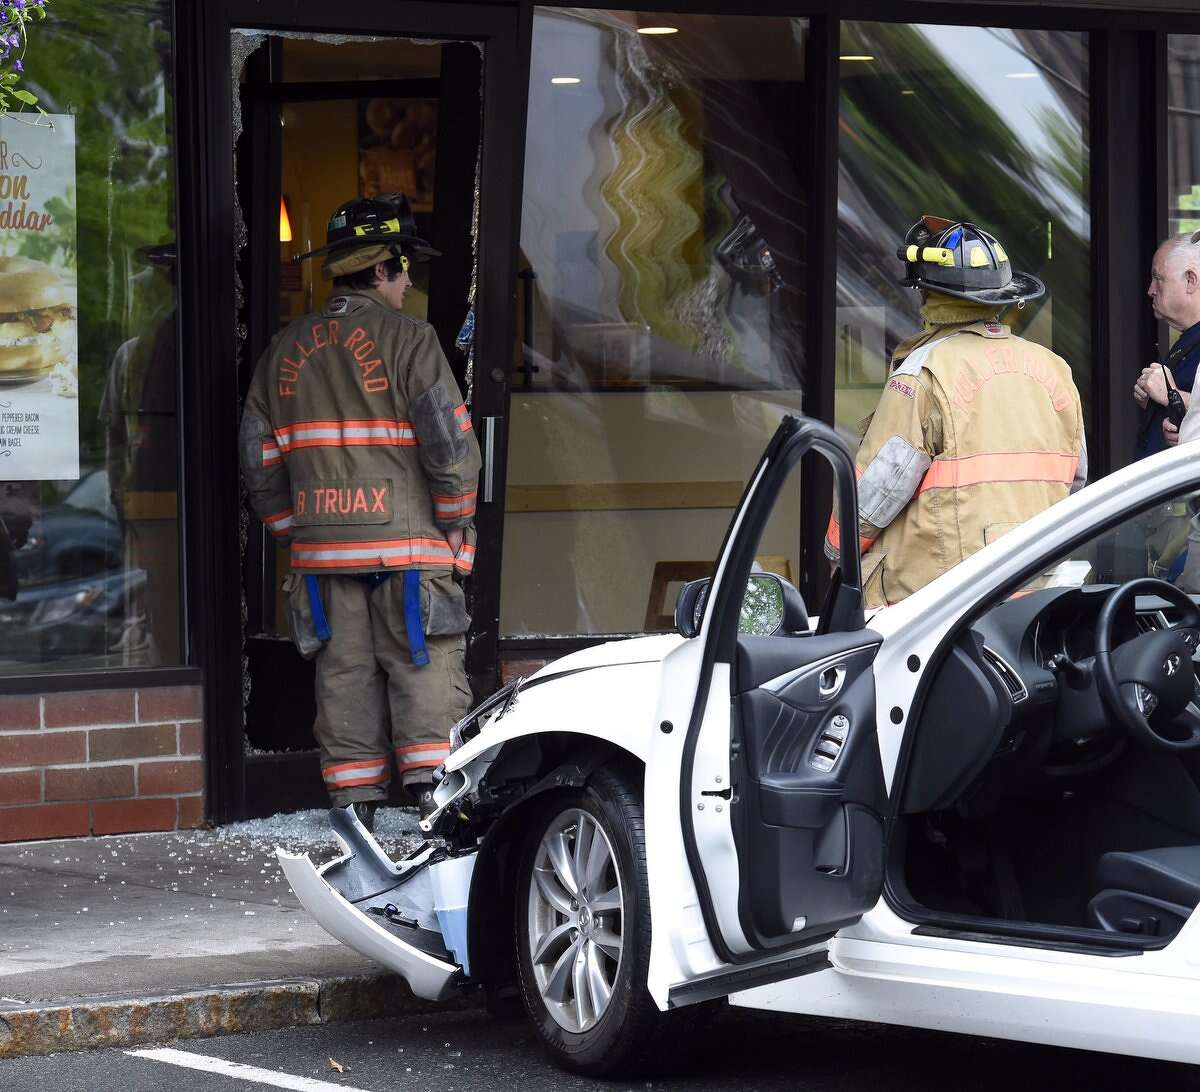 A car crashed into the Bruegger’s Bagel Bakery on Wolf Road Tuesday morning, June 7, 2016. The car struck the front of the building but it was unclear if anyone was injured in the incident, which happened at about 7:30 a.m.(Skip Dickstein / Times Union)